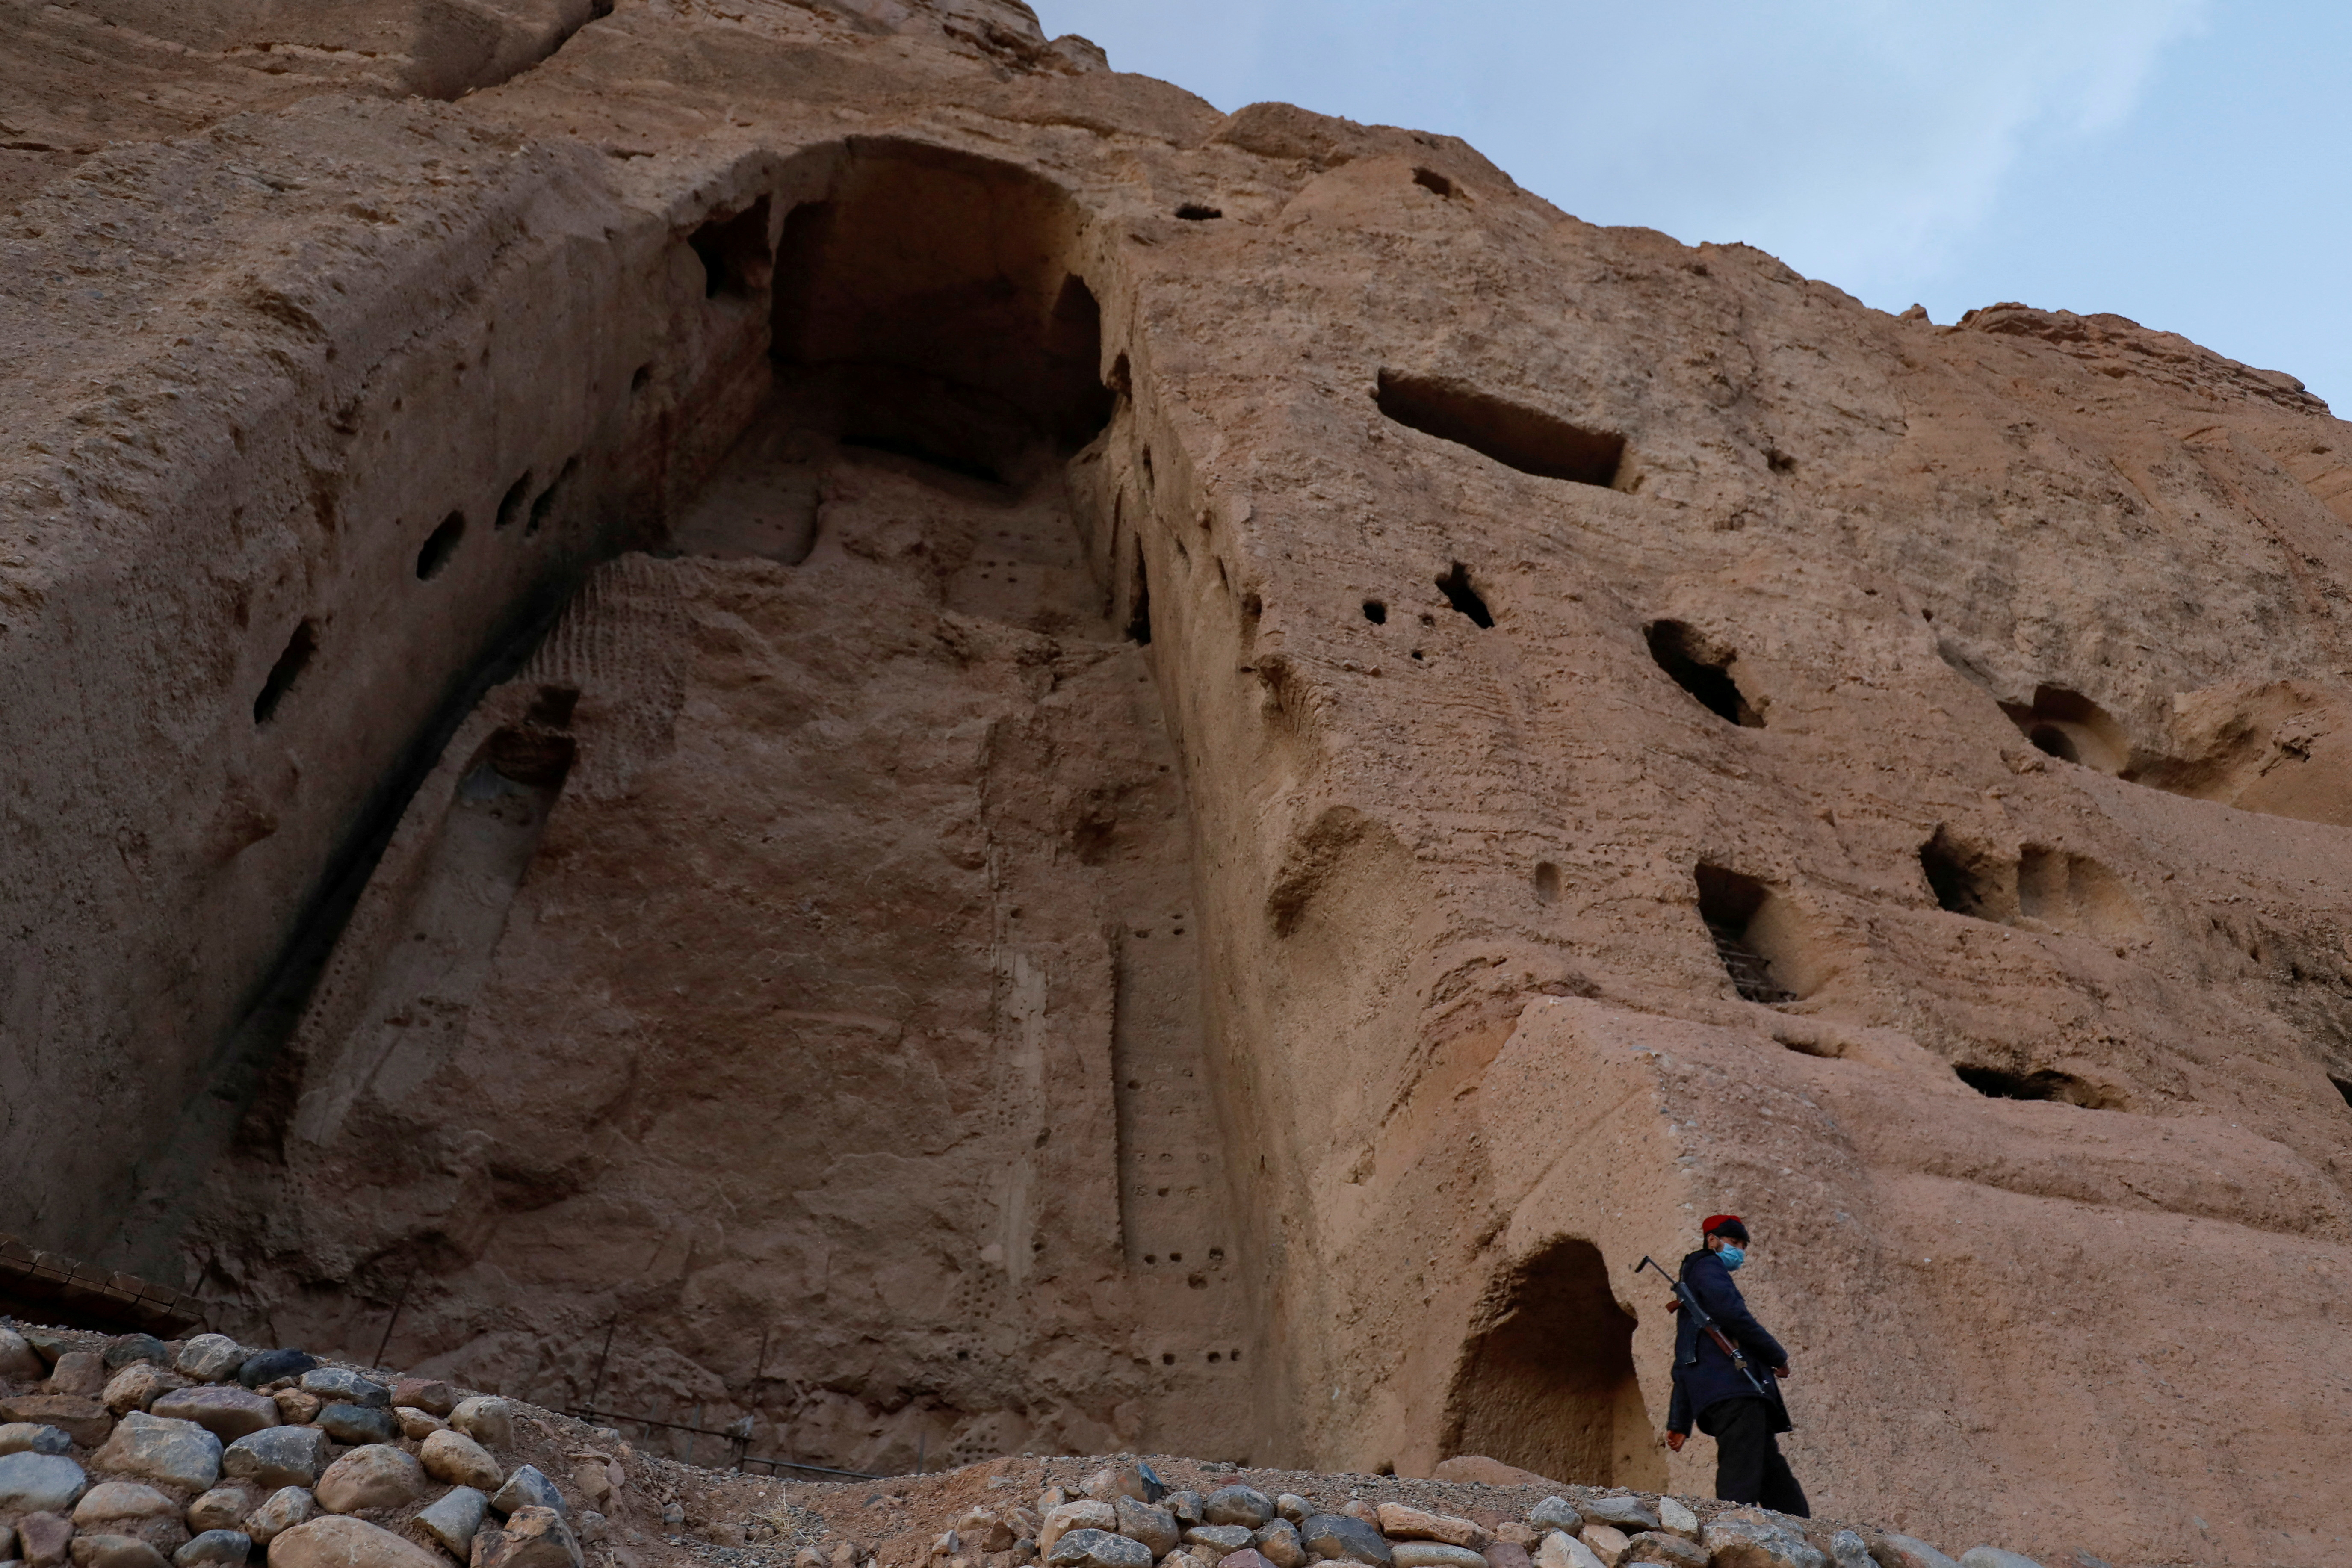 A Taliban soldier stands guard in front of the ruins of a 1500-year-old Buddha statue in Bamyan